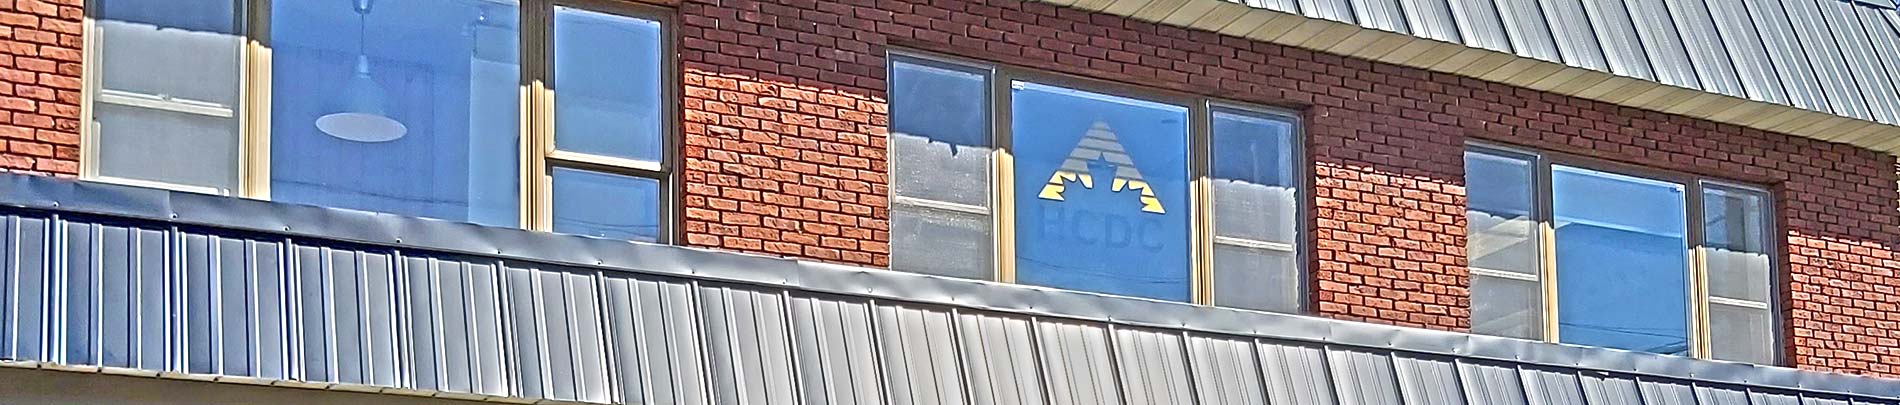 Photo of the Haliburton County Development Corp building with HCDC logo in the window.